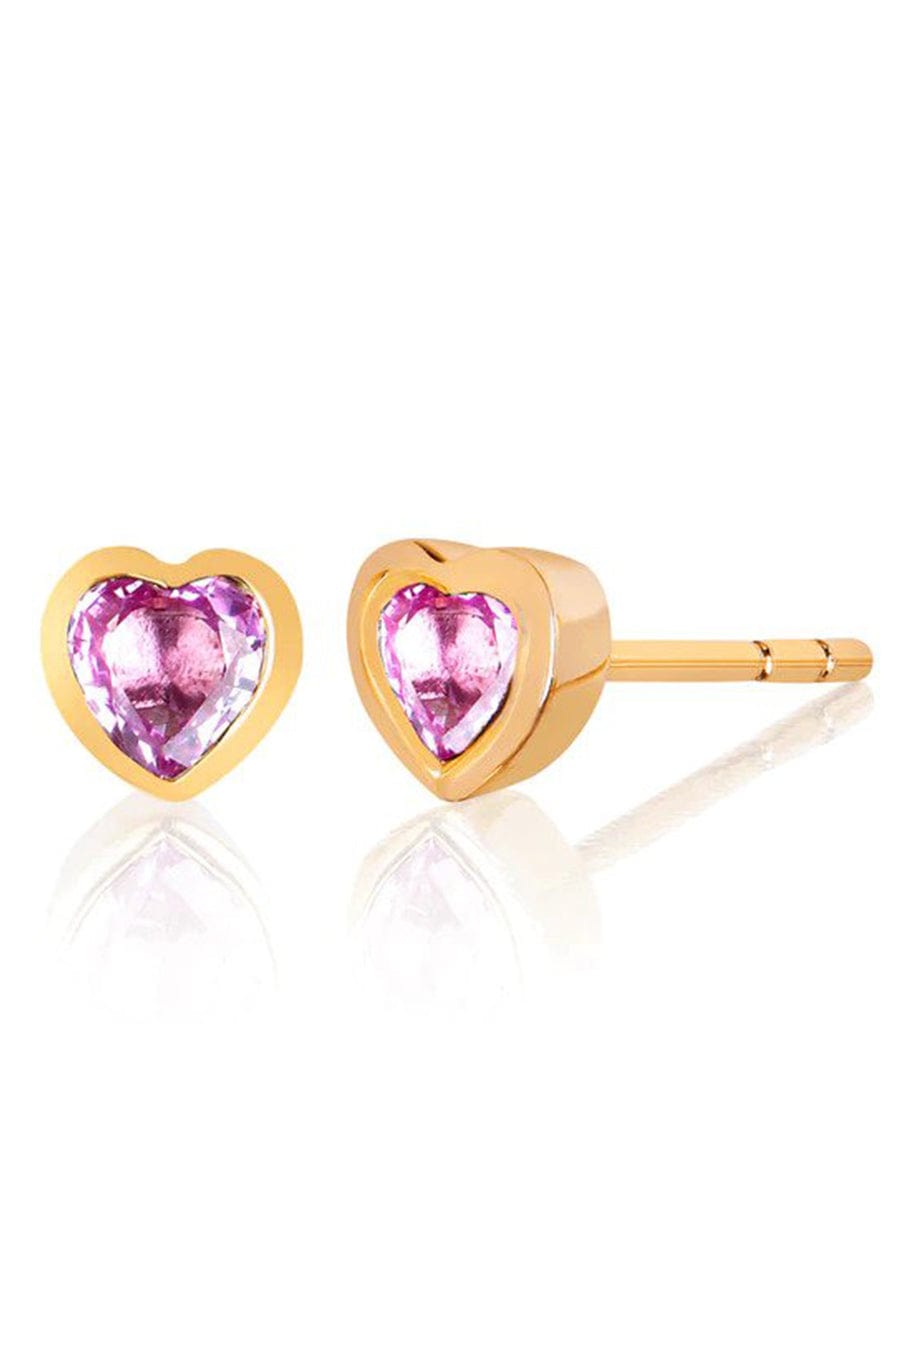 EF COLLECTION-Pink Sapphire Heart Studs-YELLOW GOLD